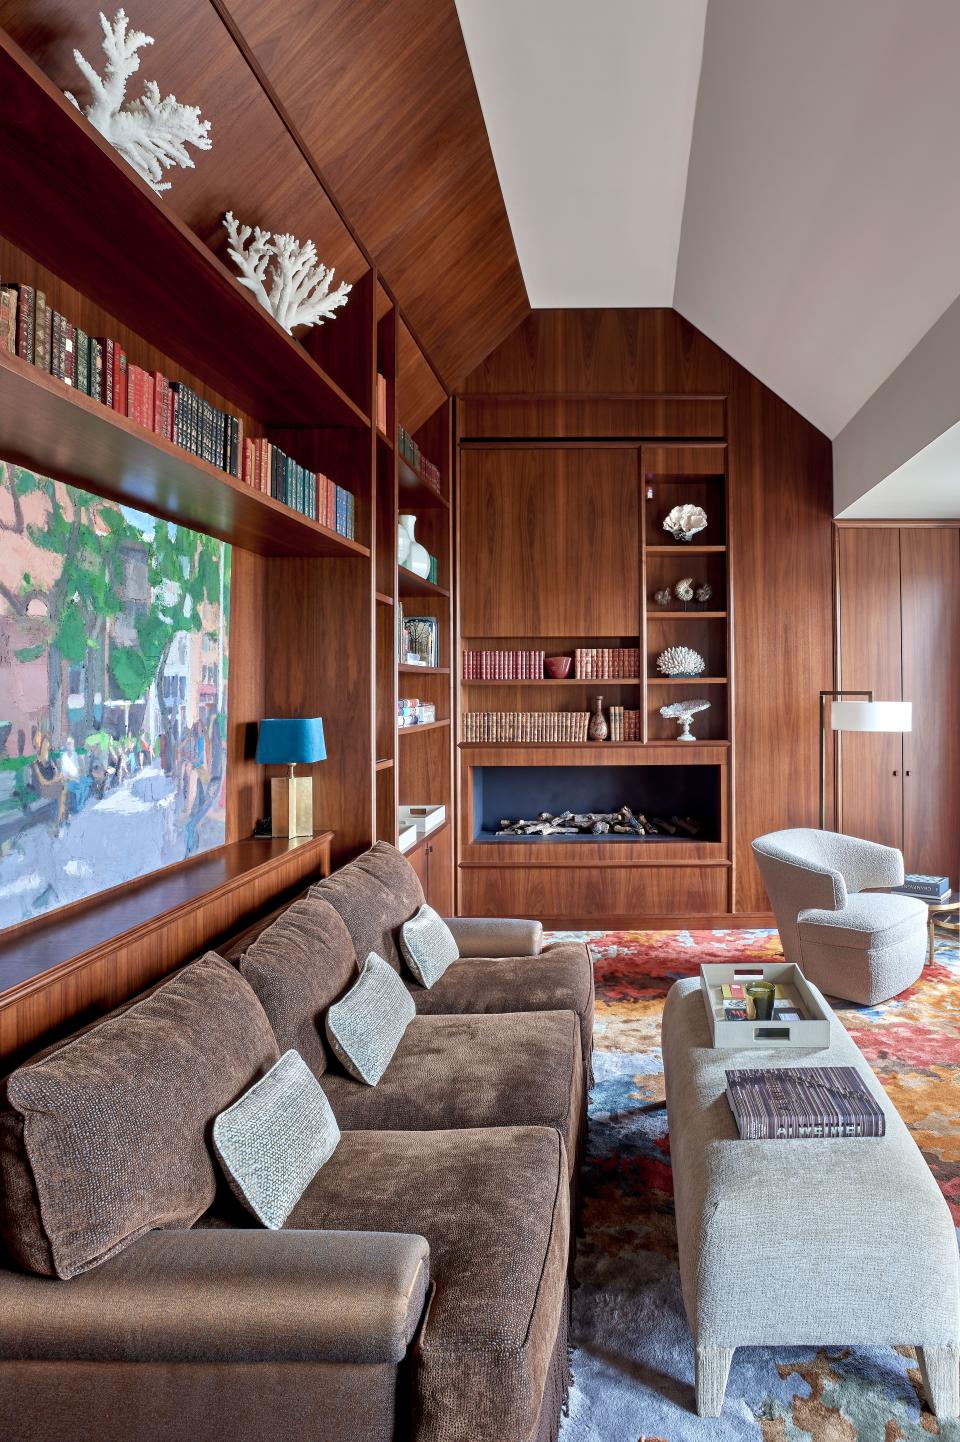 Two smaller rooms above the apartment's main floor allowed for additional space to create this library with amazing views over the Invalides esplanade. Wall-to-wall carpet by Holland & Sherry and the Lana chair by Donghia. Sofa and ottoman in Rubelli fabric. The painting above the sofa is by American artist John Dubrow, and Laura Caye Decoration helped Wood hunt down items from the streets of Paris and the flea market. Wood explains, “This area provided a fun opportunity to create a cabinet of natural curiosities, with items sourced from Deyrolle and books.”